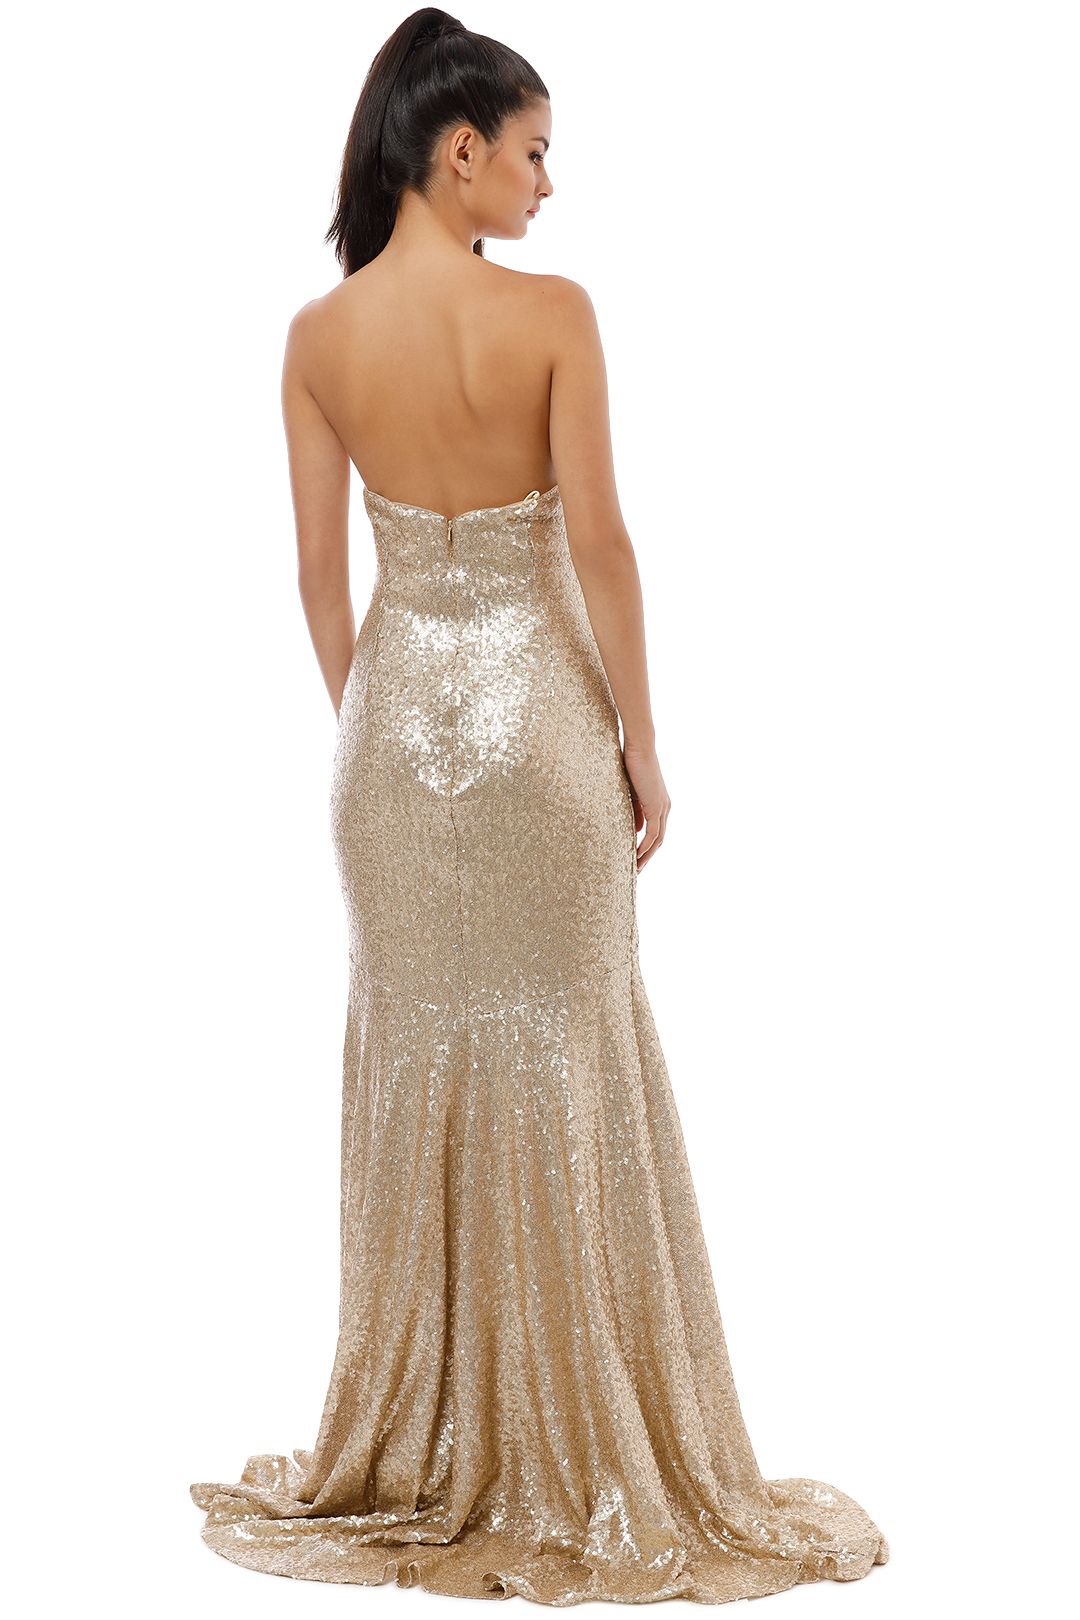 Gold Convertible Bridesmaid Dresses,Infinity Dresses, Multiway Wrap Dresses  - NICEOO